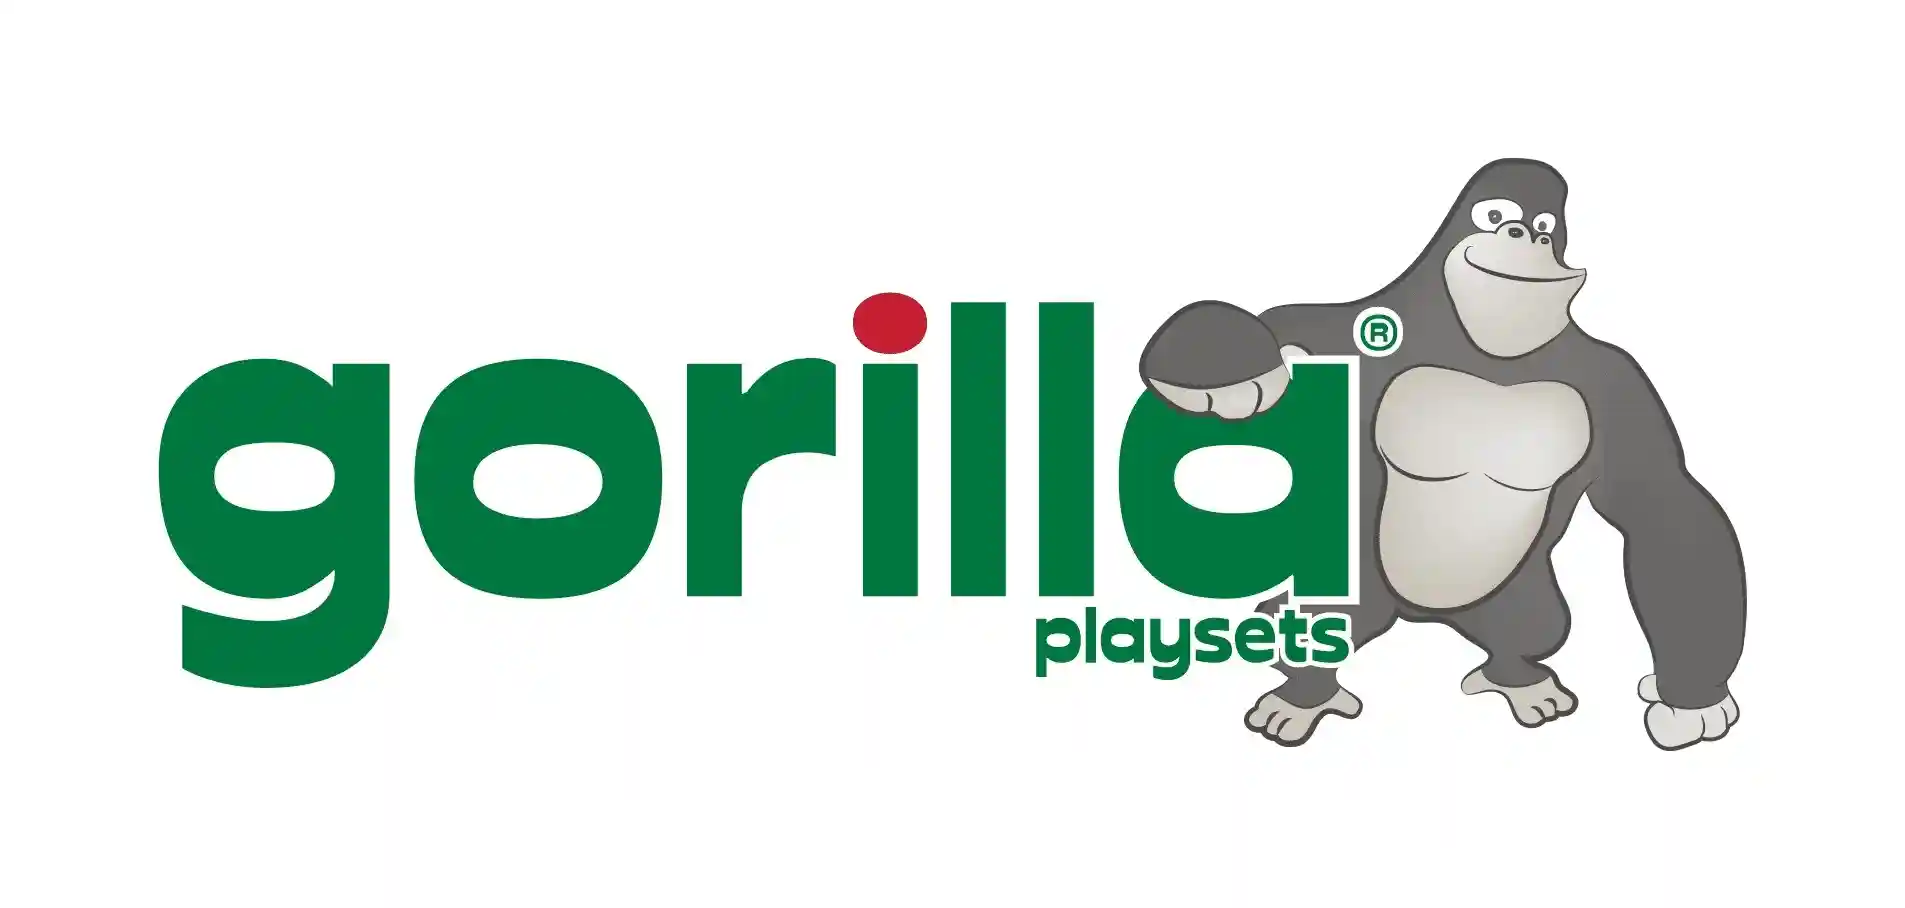 Take 10% Discounts - Gorilla Playsets Special Offer On Everything